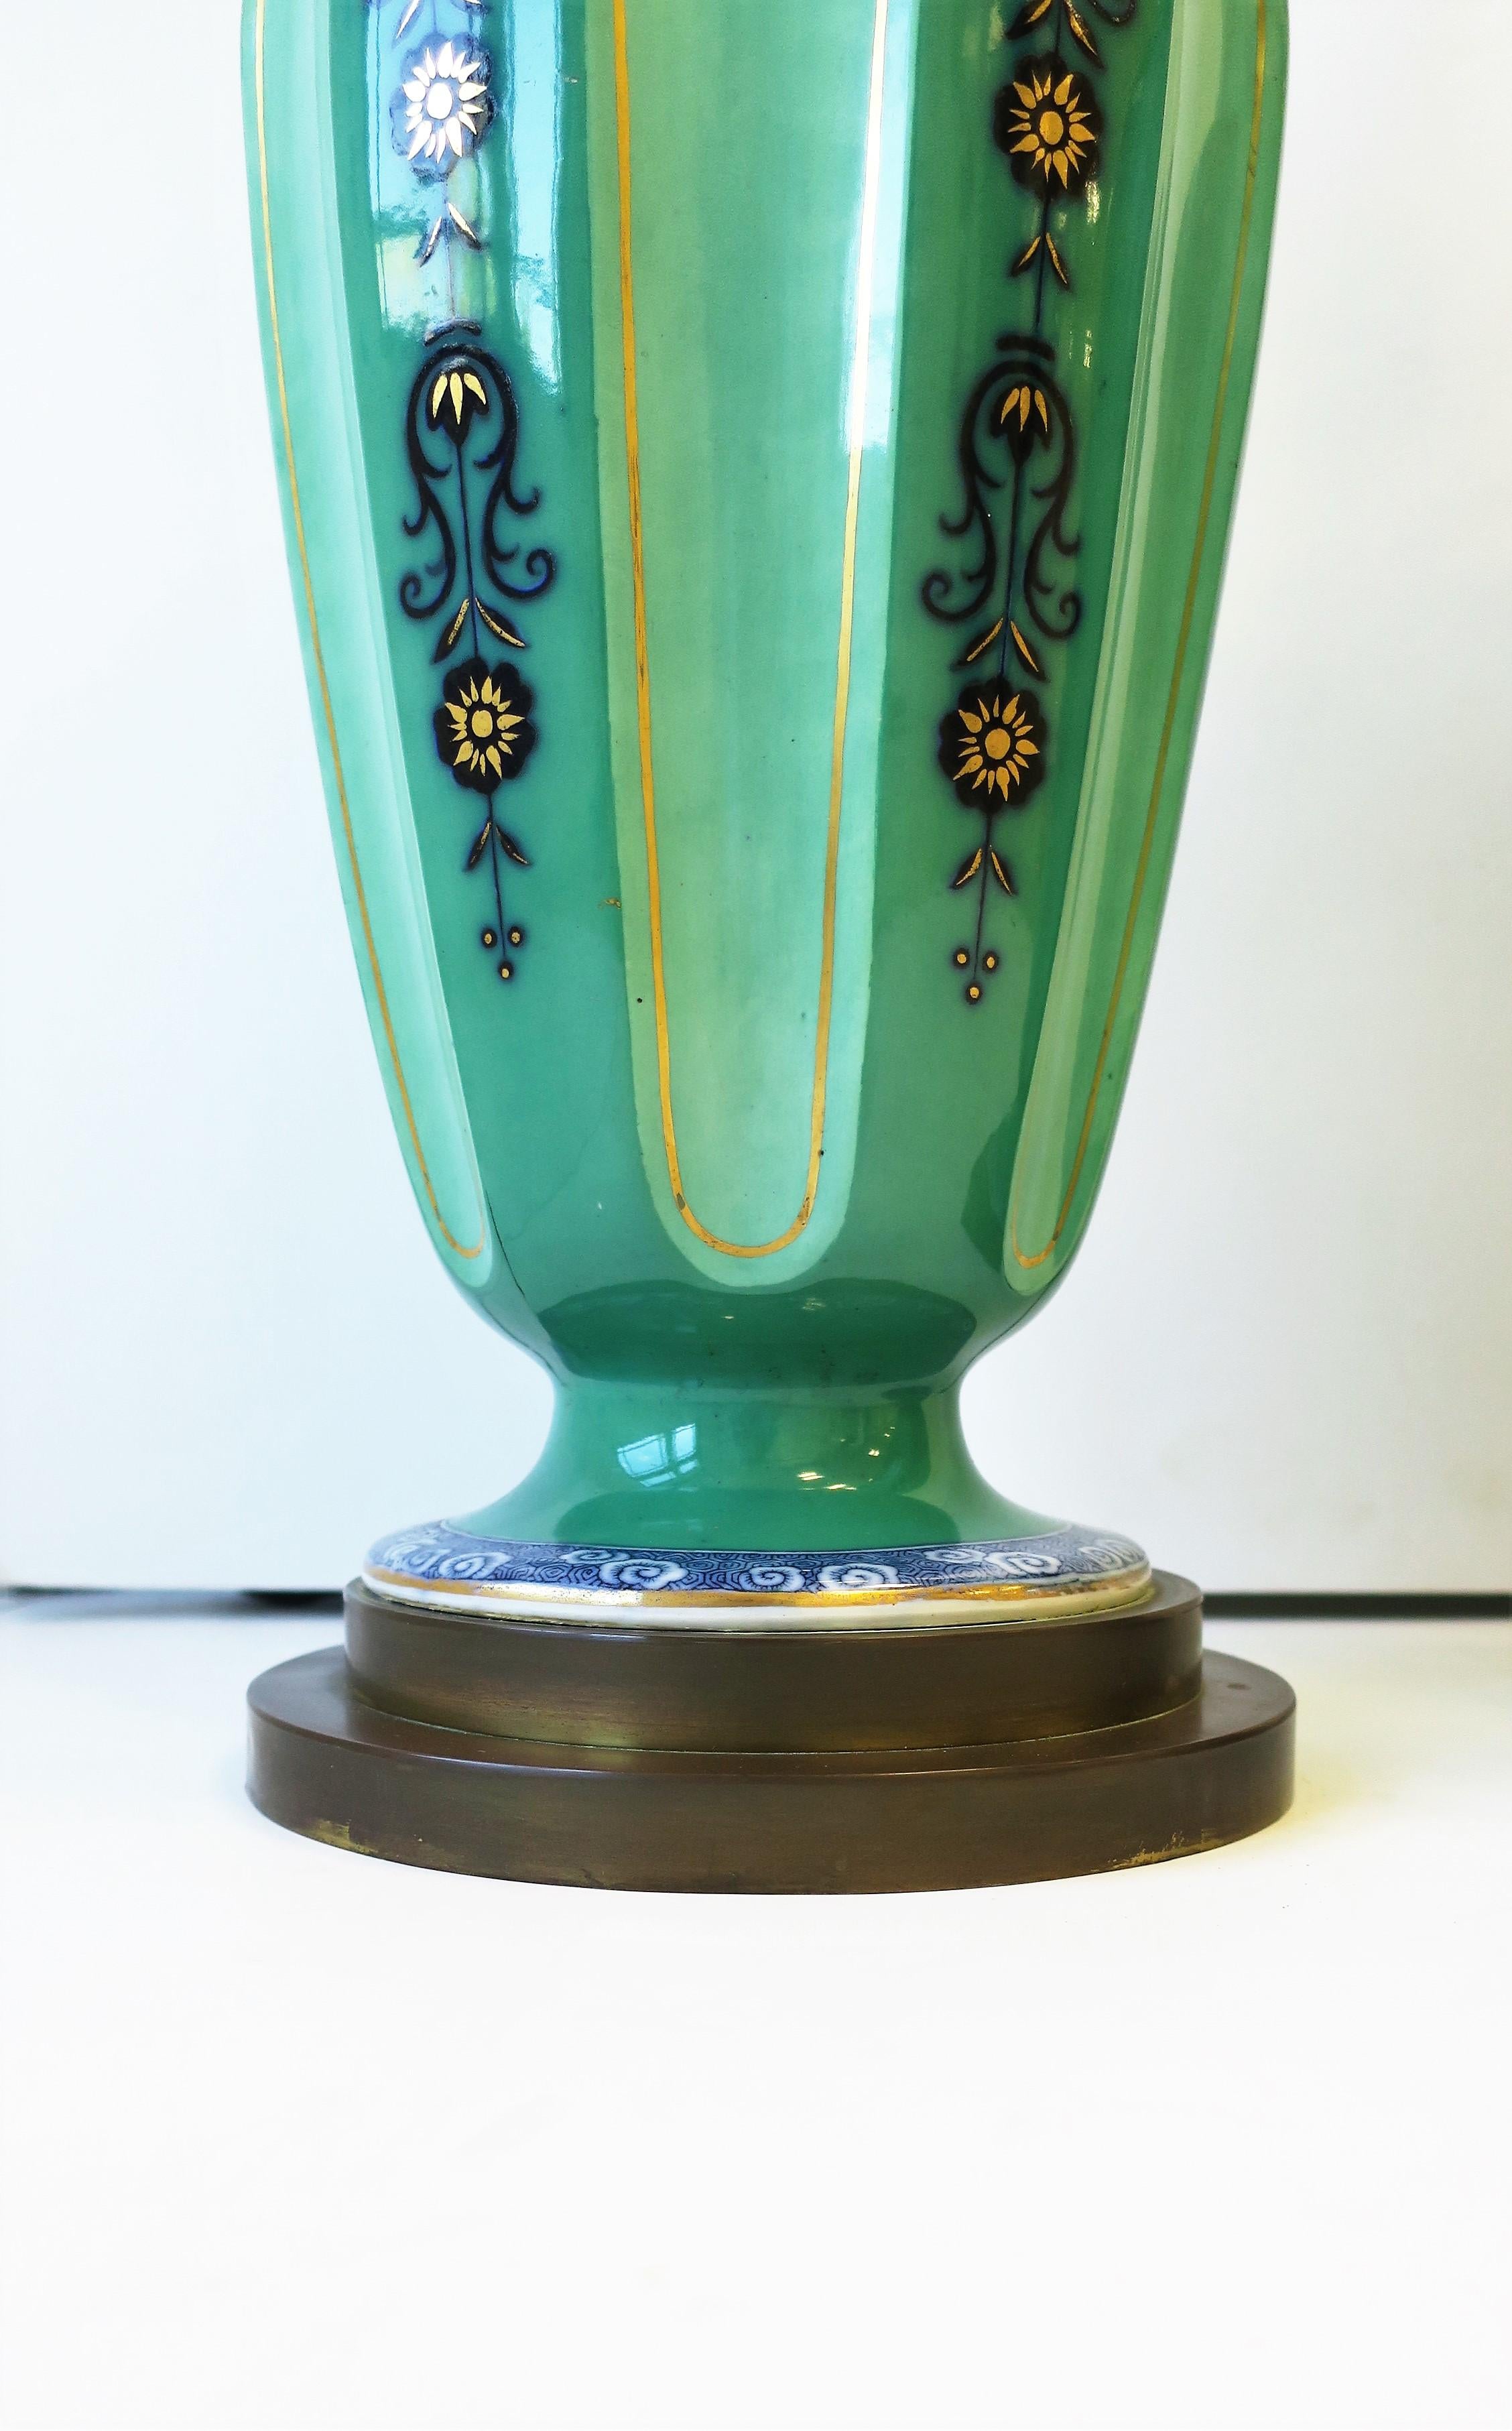 Dutch Blue White Green Ceramic Table Lamps Ginger Jar Style, circa 1930s For Sale 8